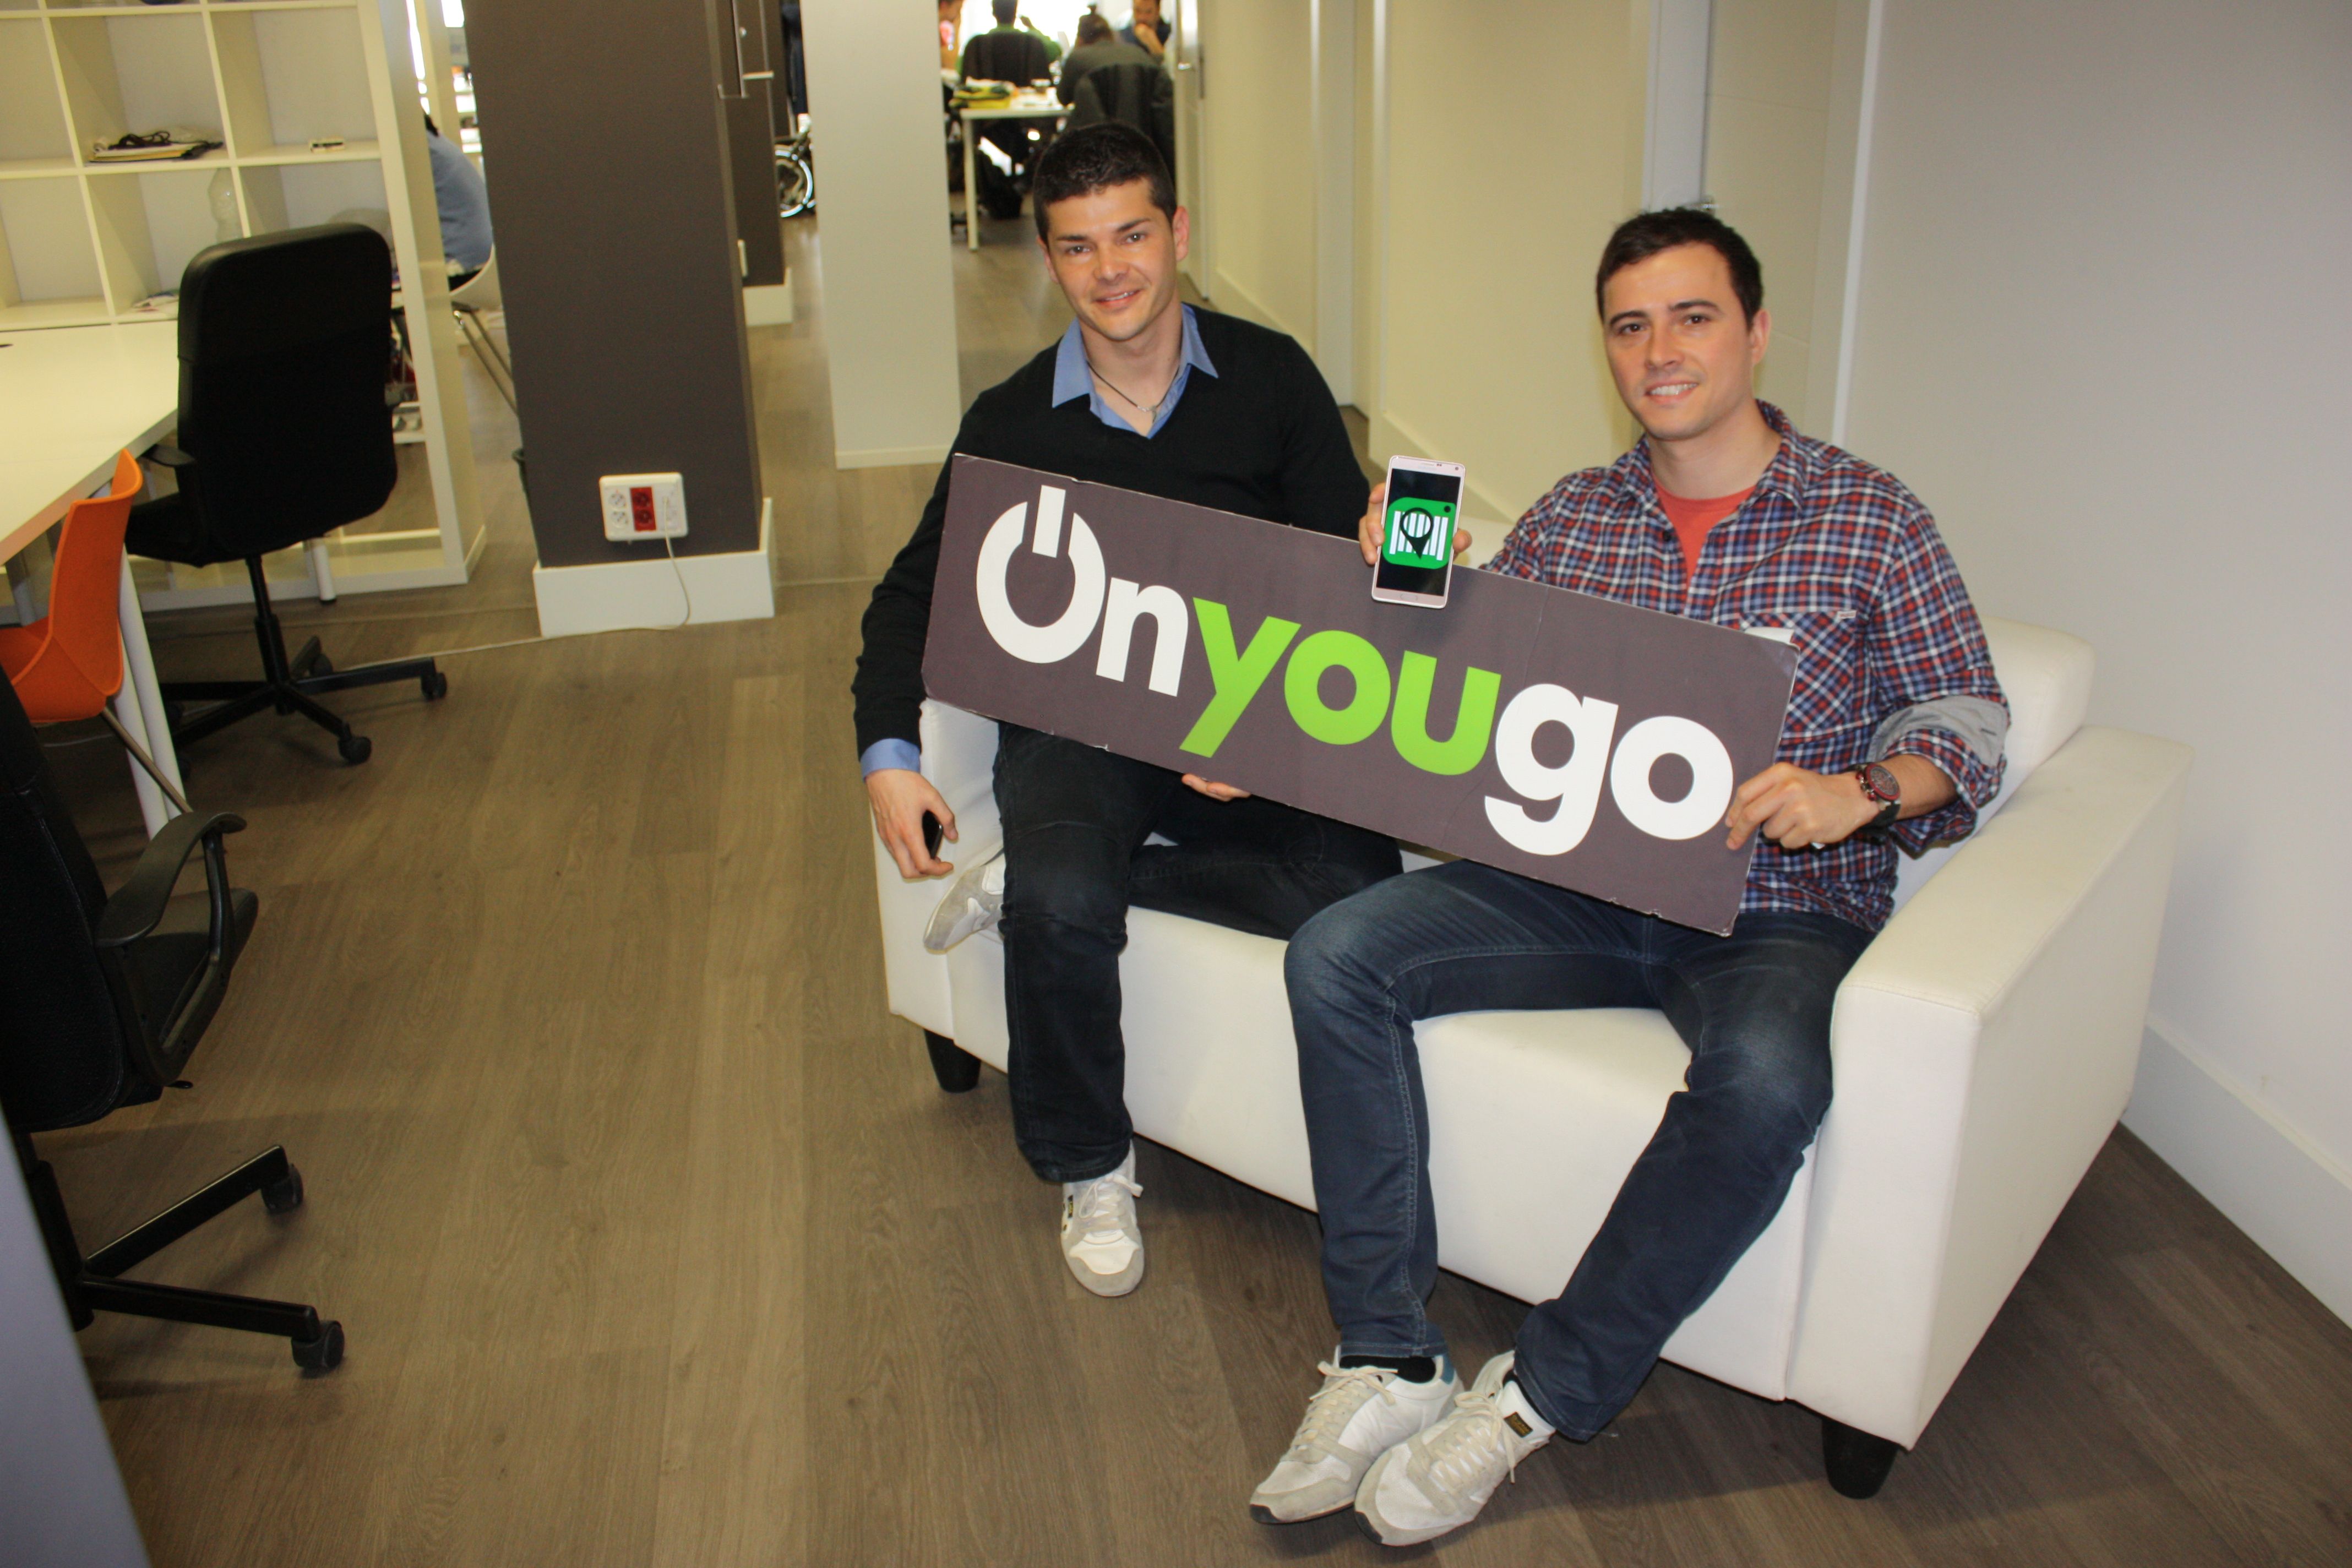 Onyougo: the application that compares prices